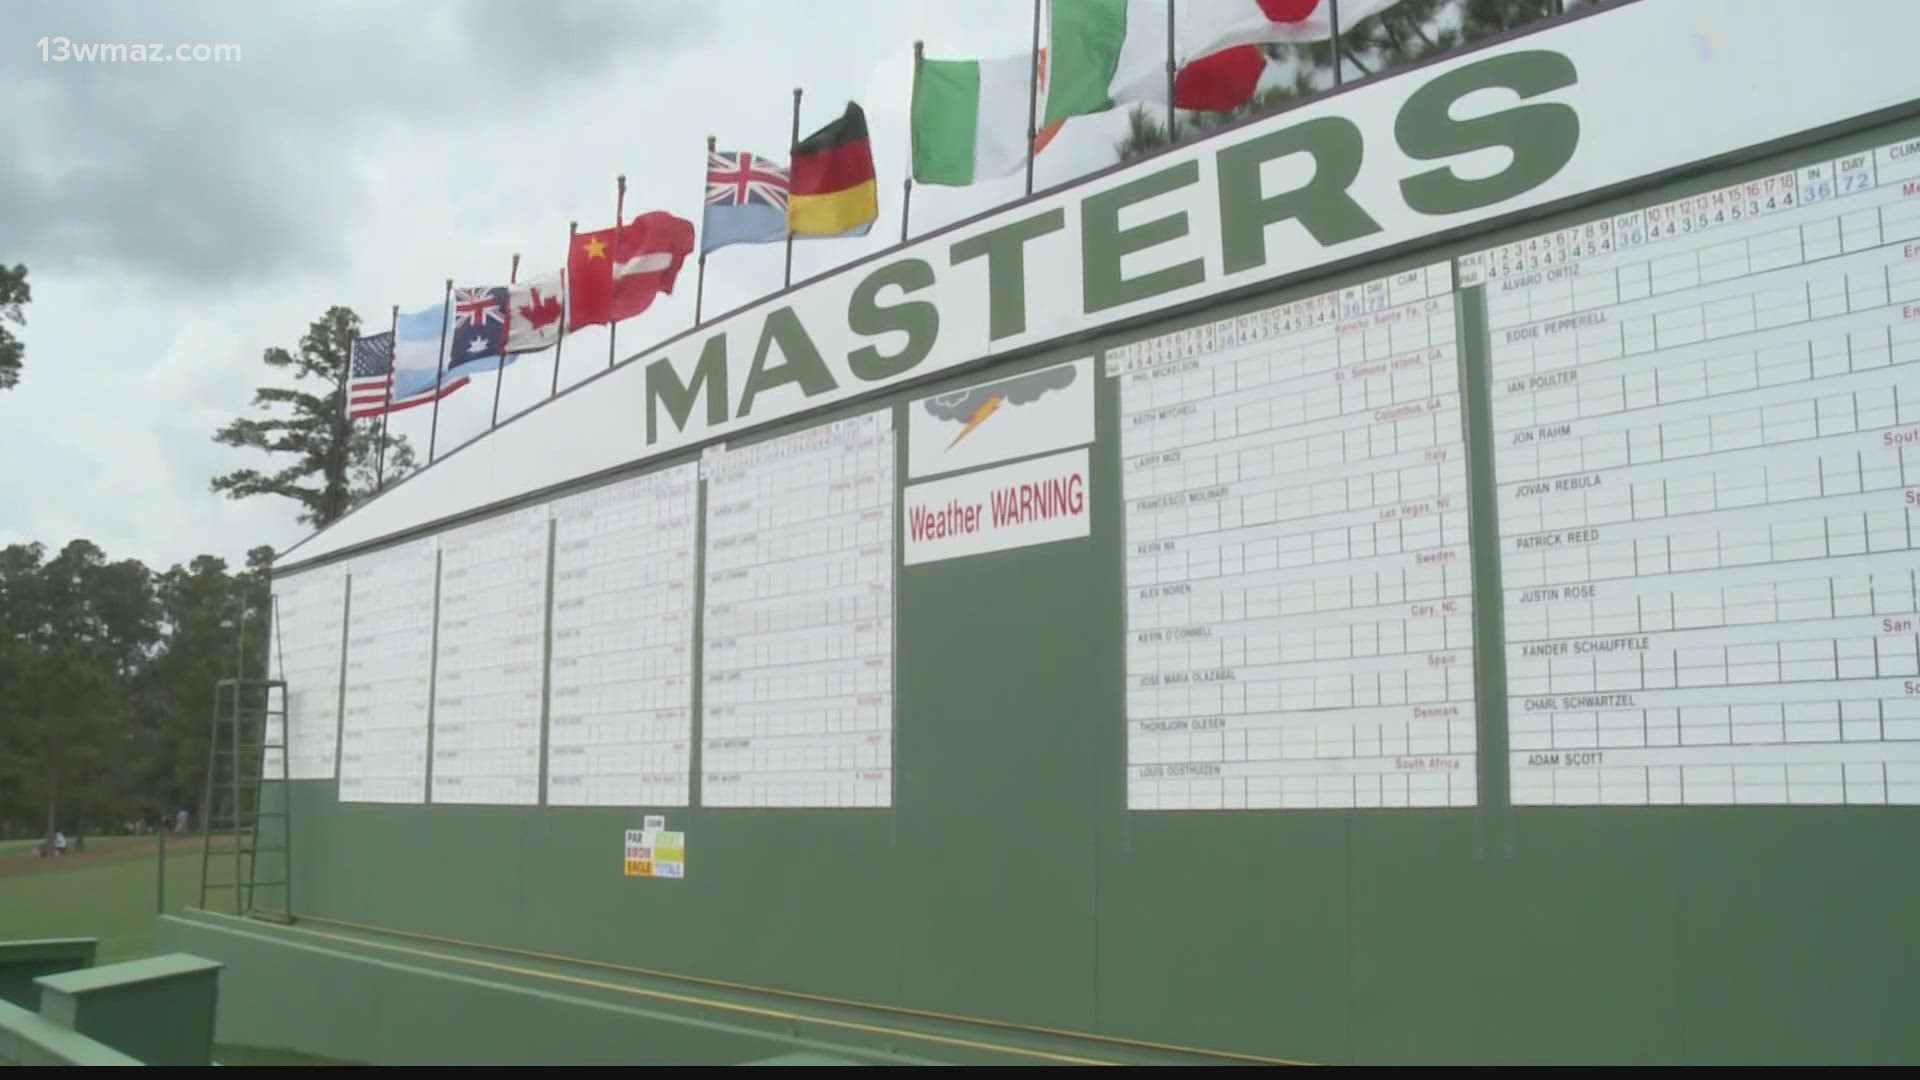 2020 Masters will be like no tournament we've seen before from Augusta National. One Central Georgia golf pro tells us what may be different for golfers this year